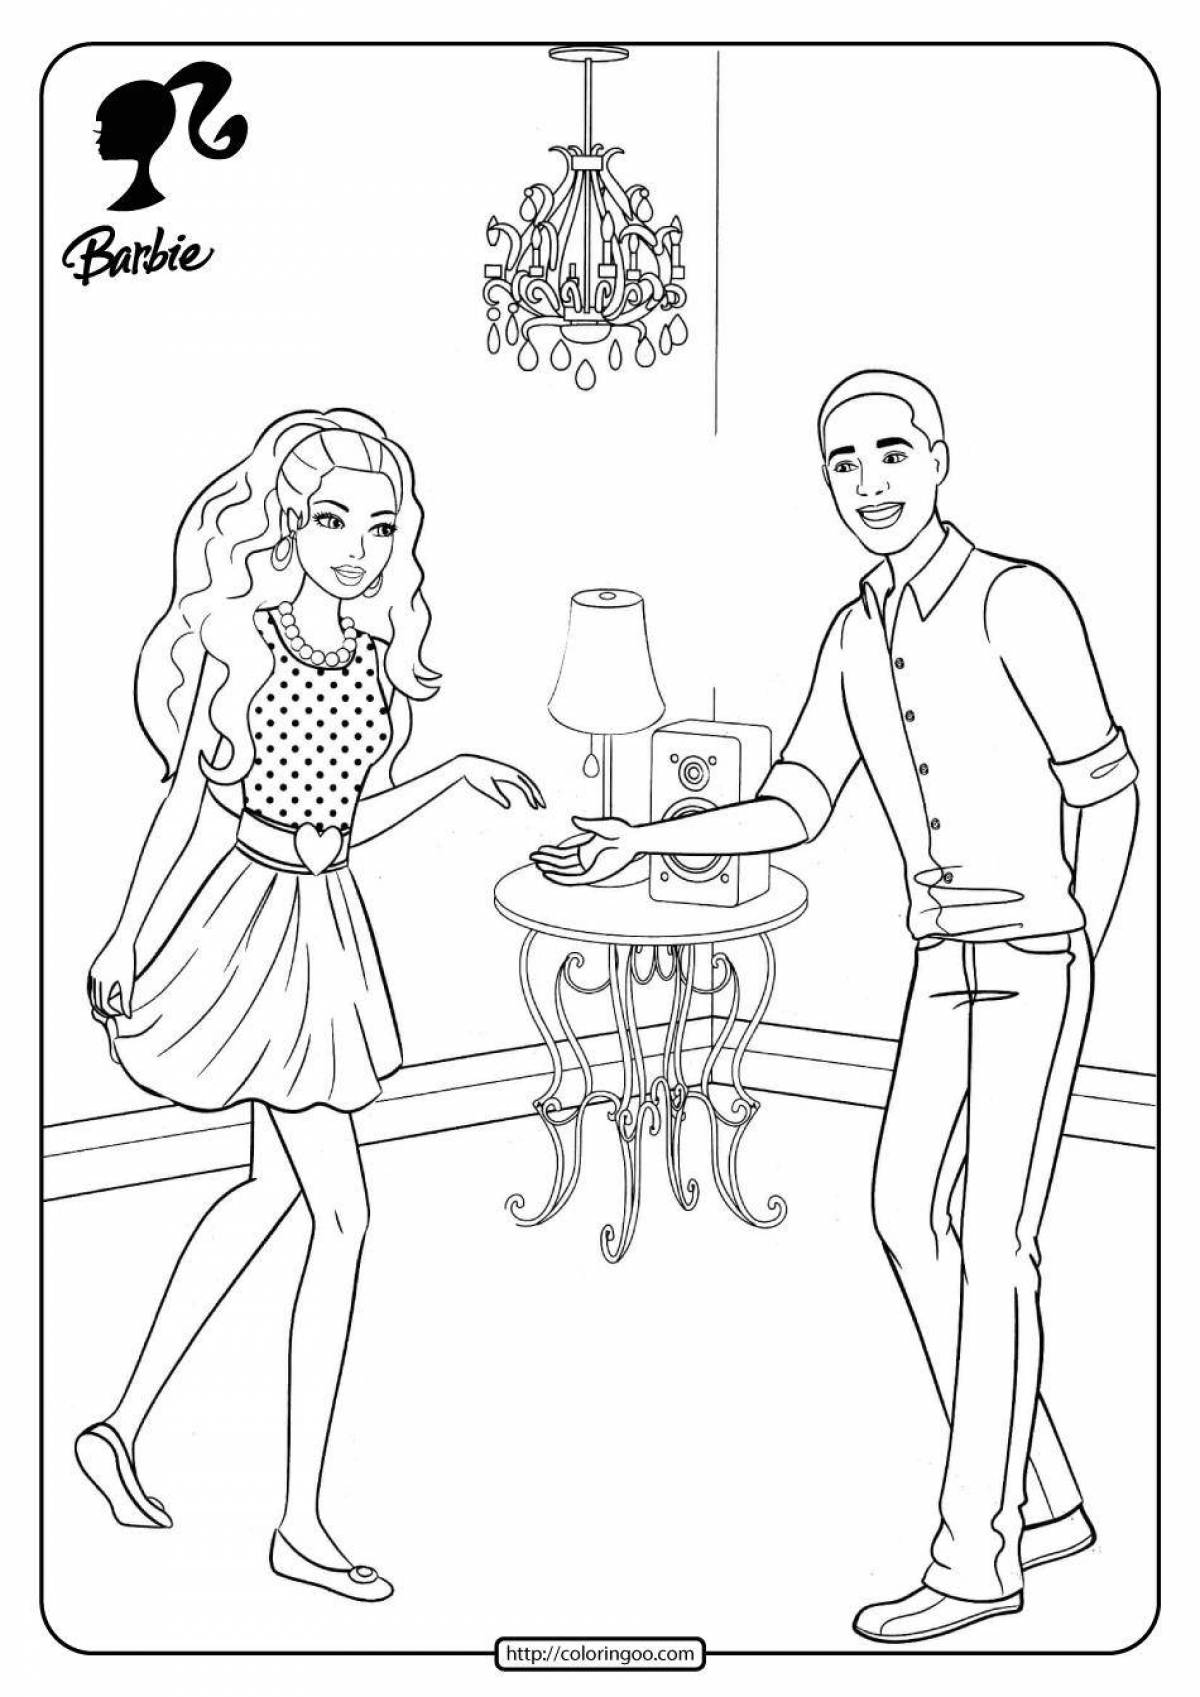 Coloring book charming barbie doctor